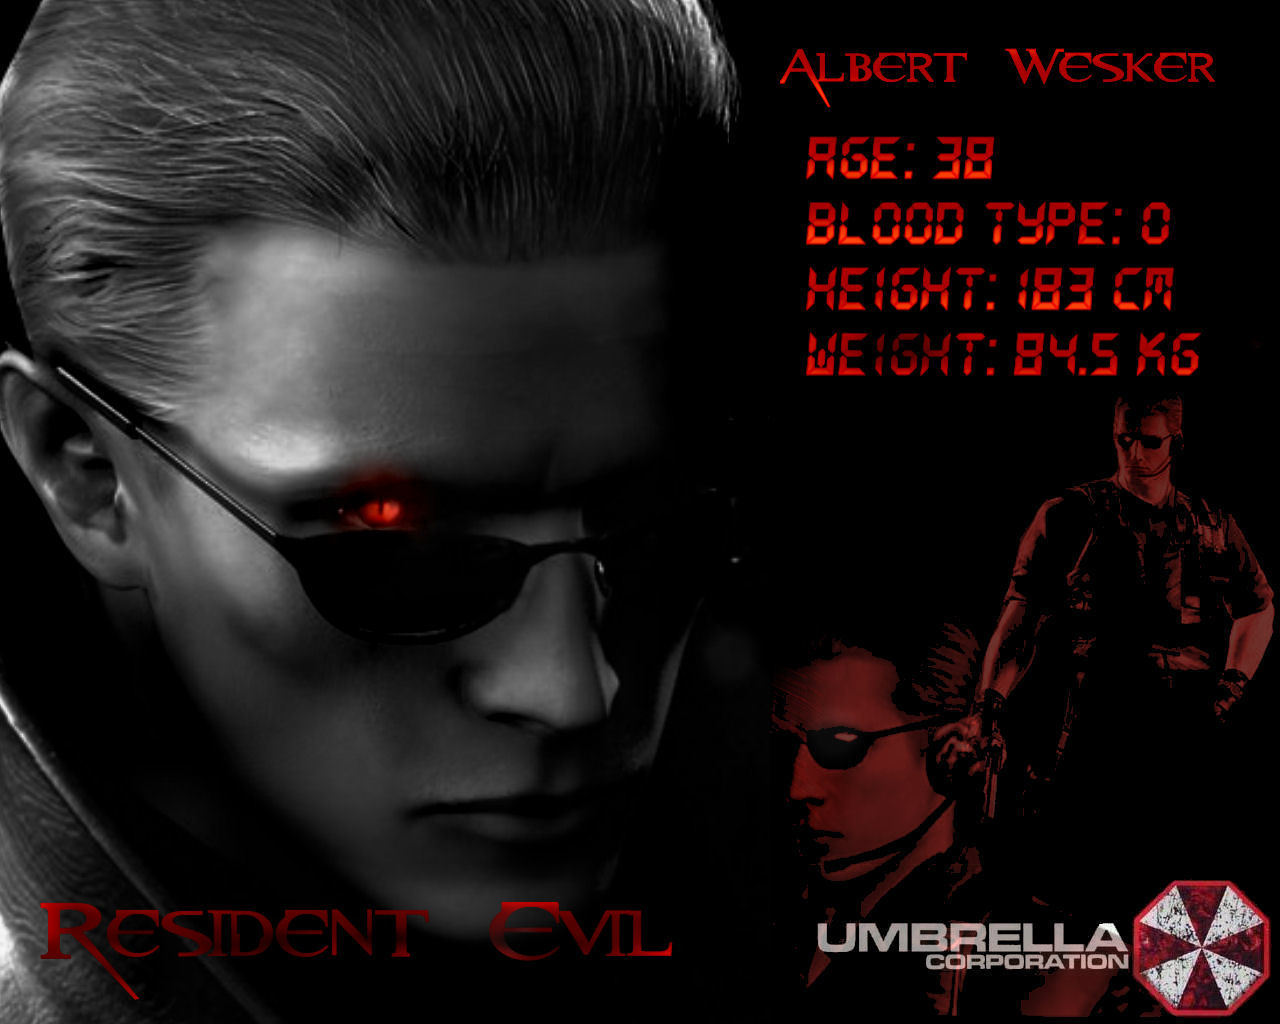 Albert Wesker Image HD Wallpaper And Background Photos